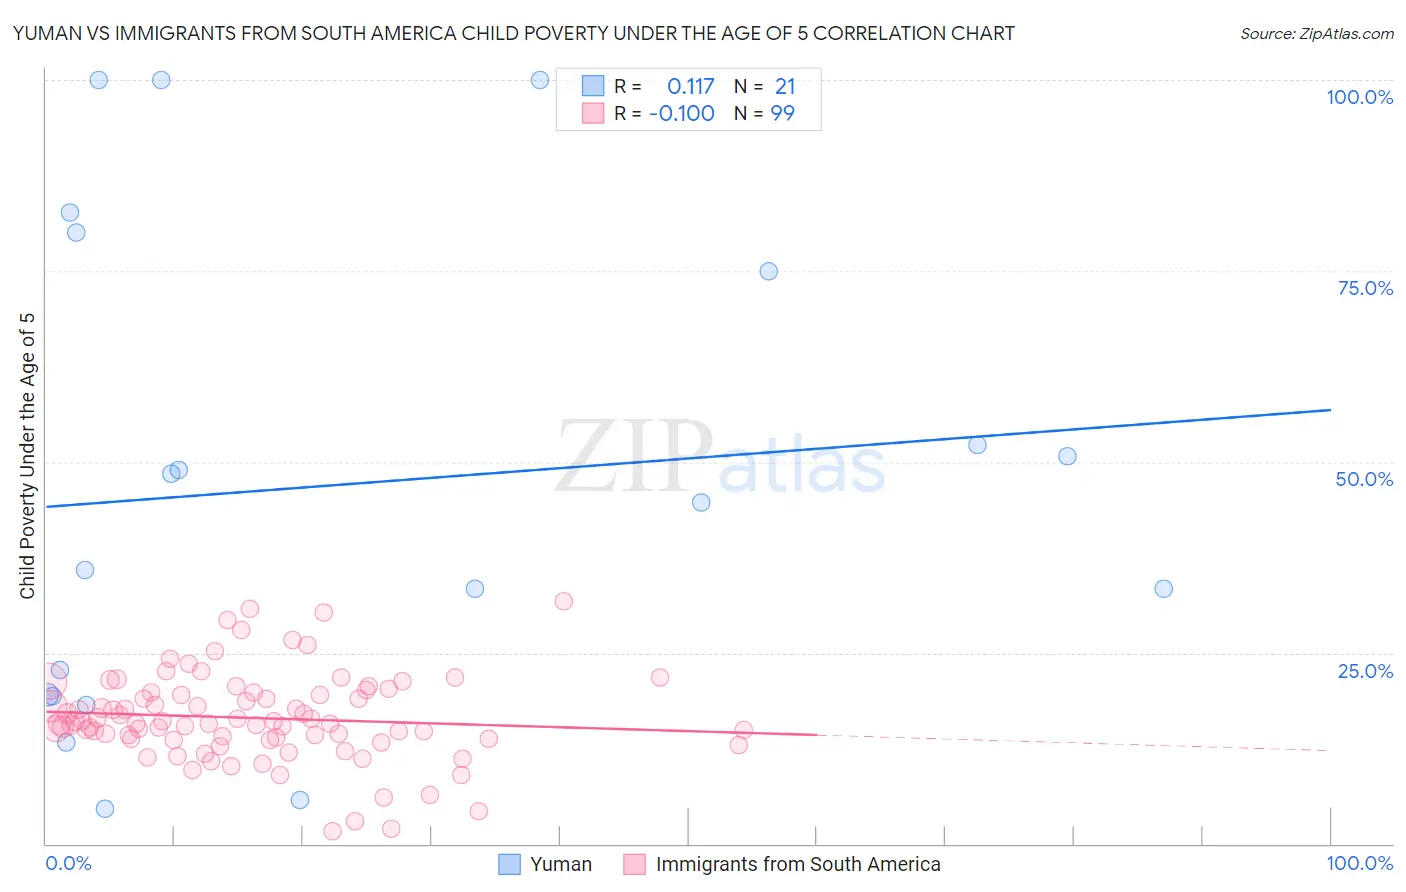 Yuman vs Immigrants from South America Child Poverty Under the Age of 5